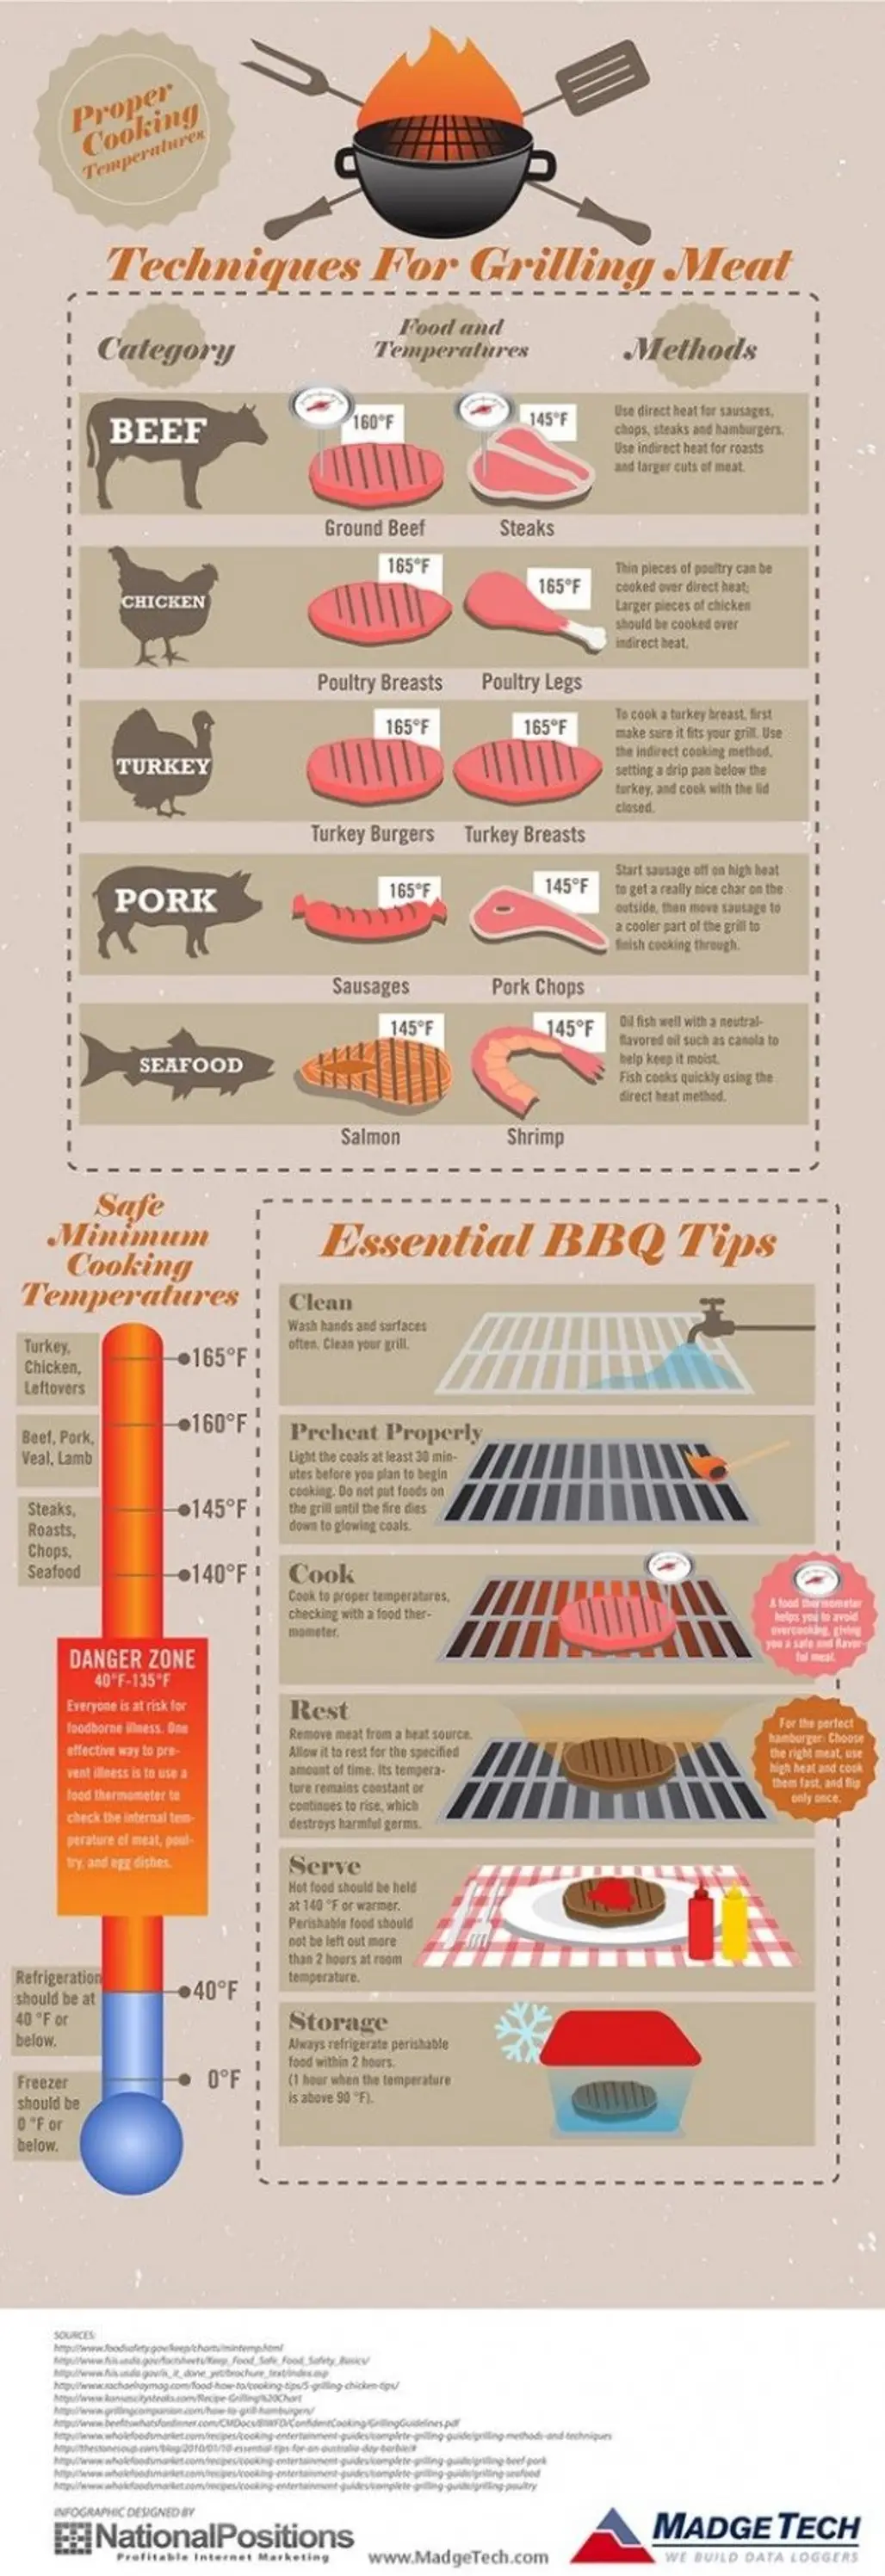 How to Grill Meat